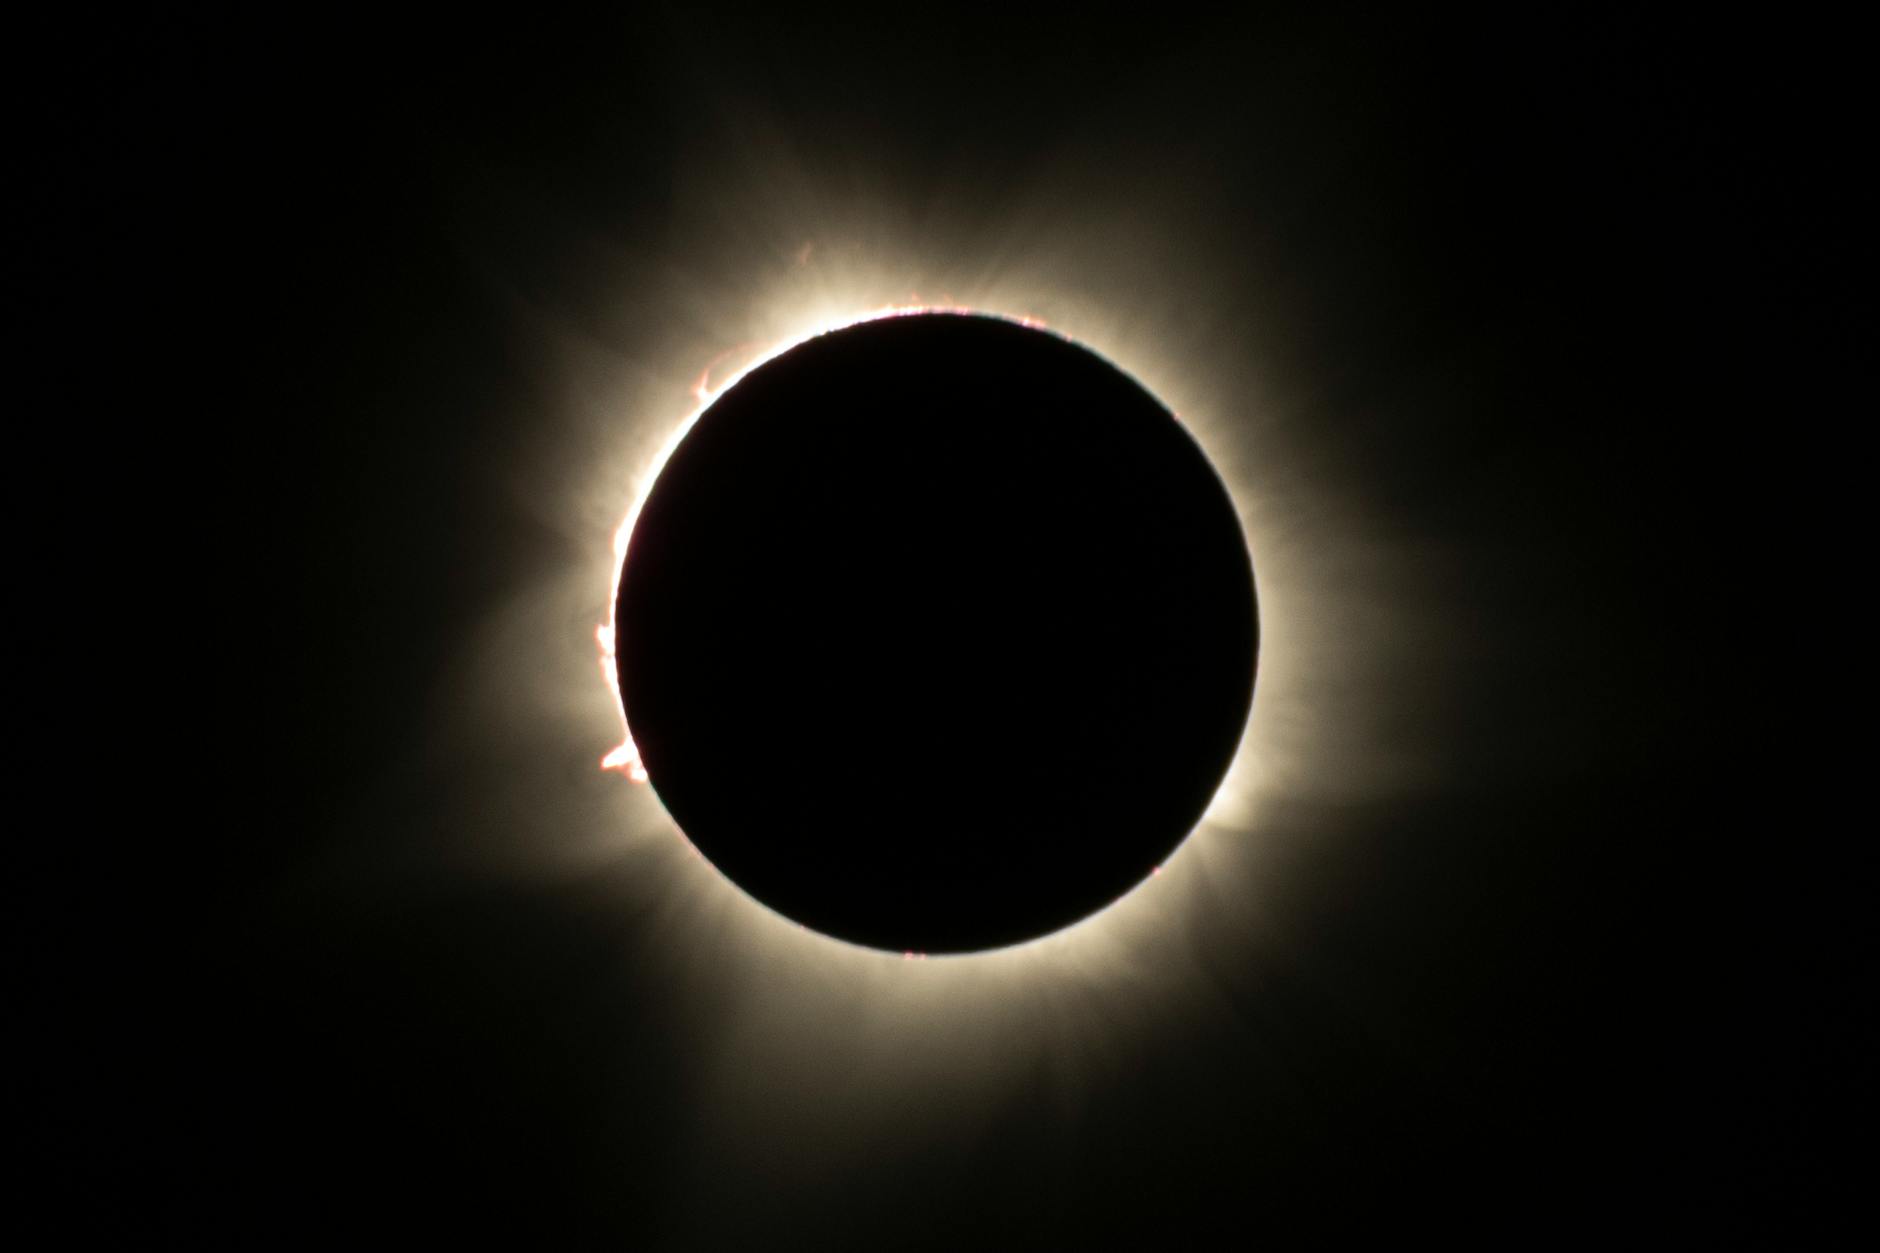 A total eclipse of the sun